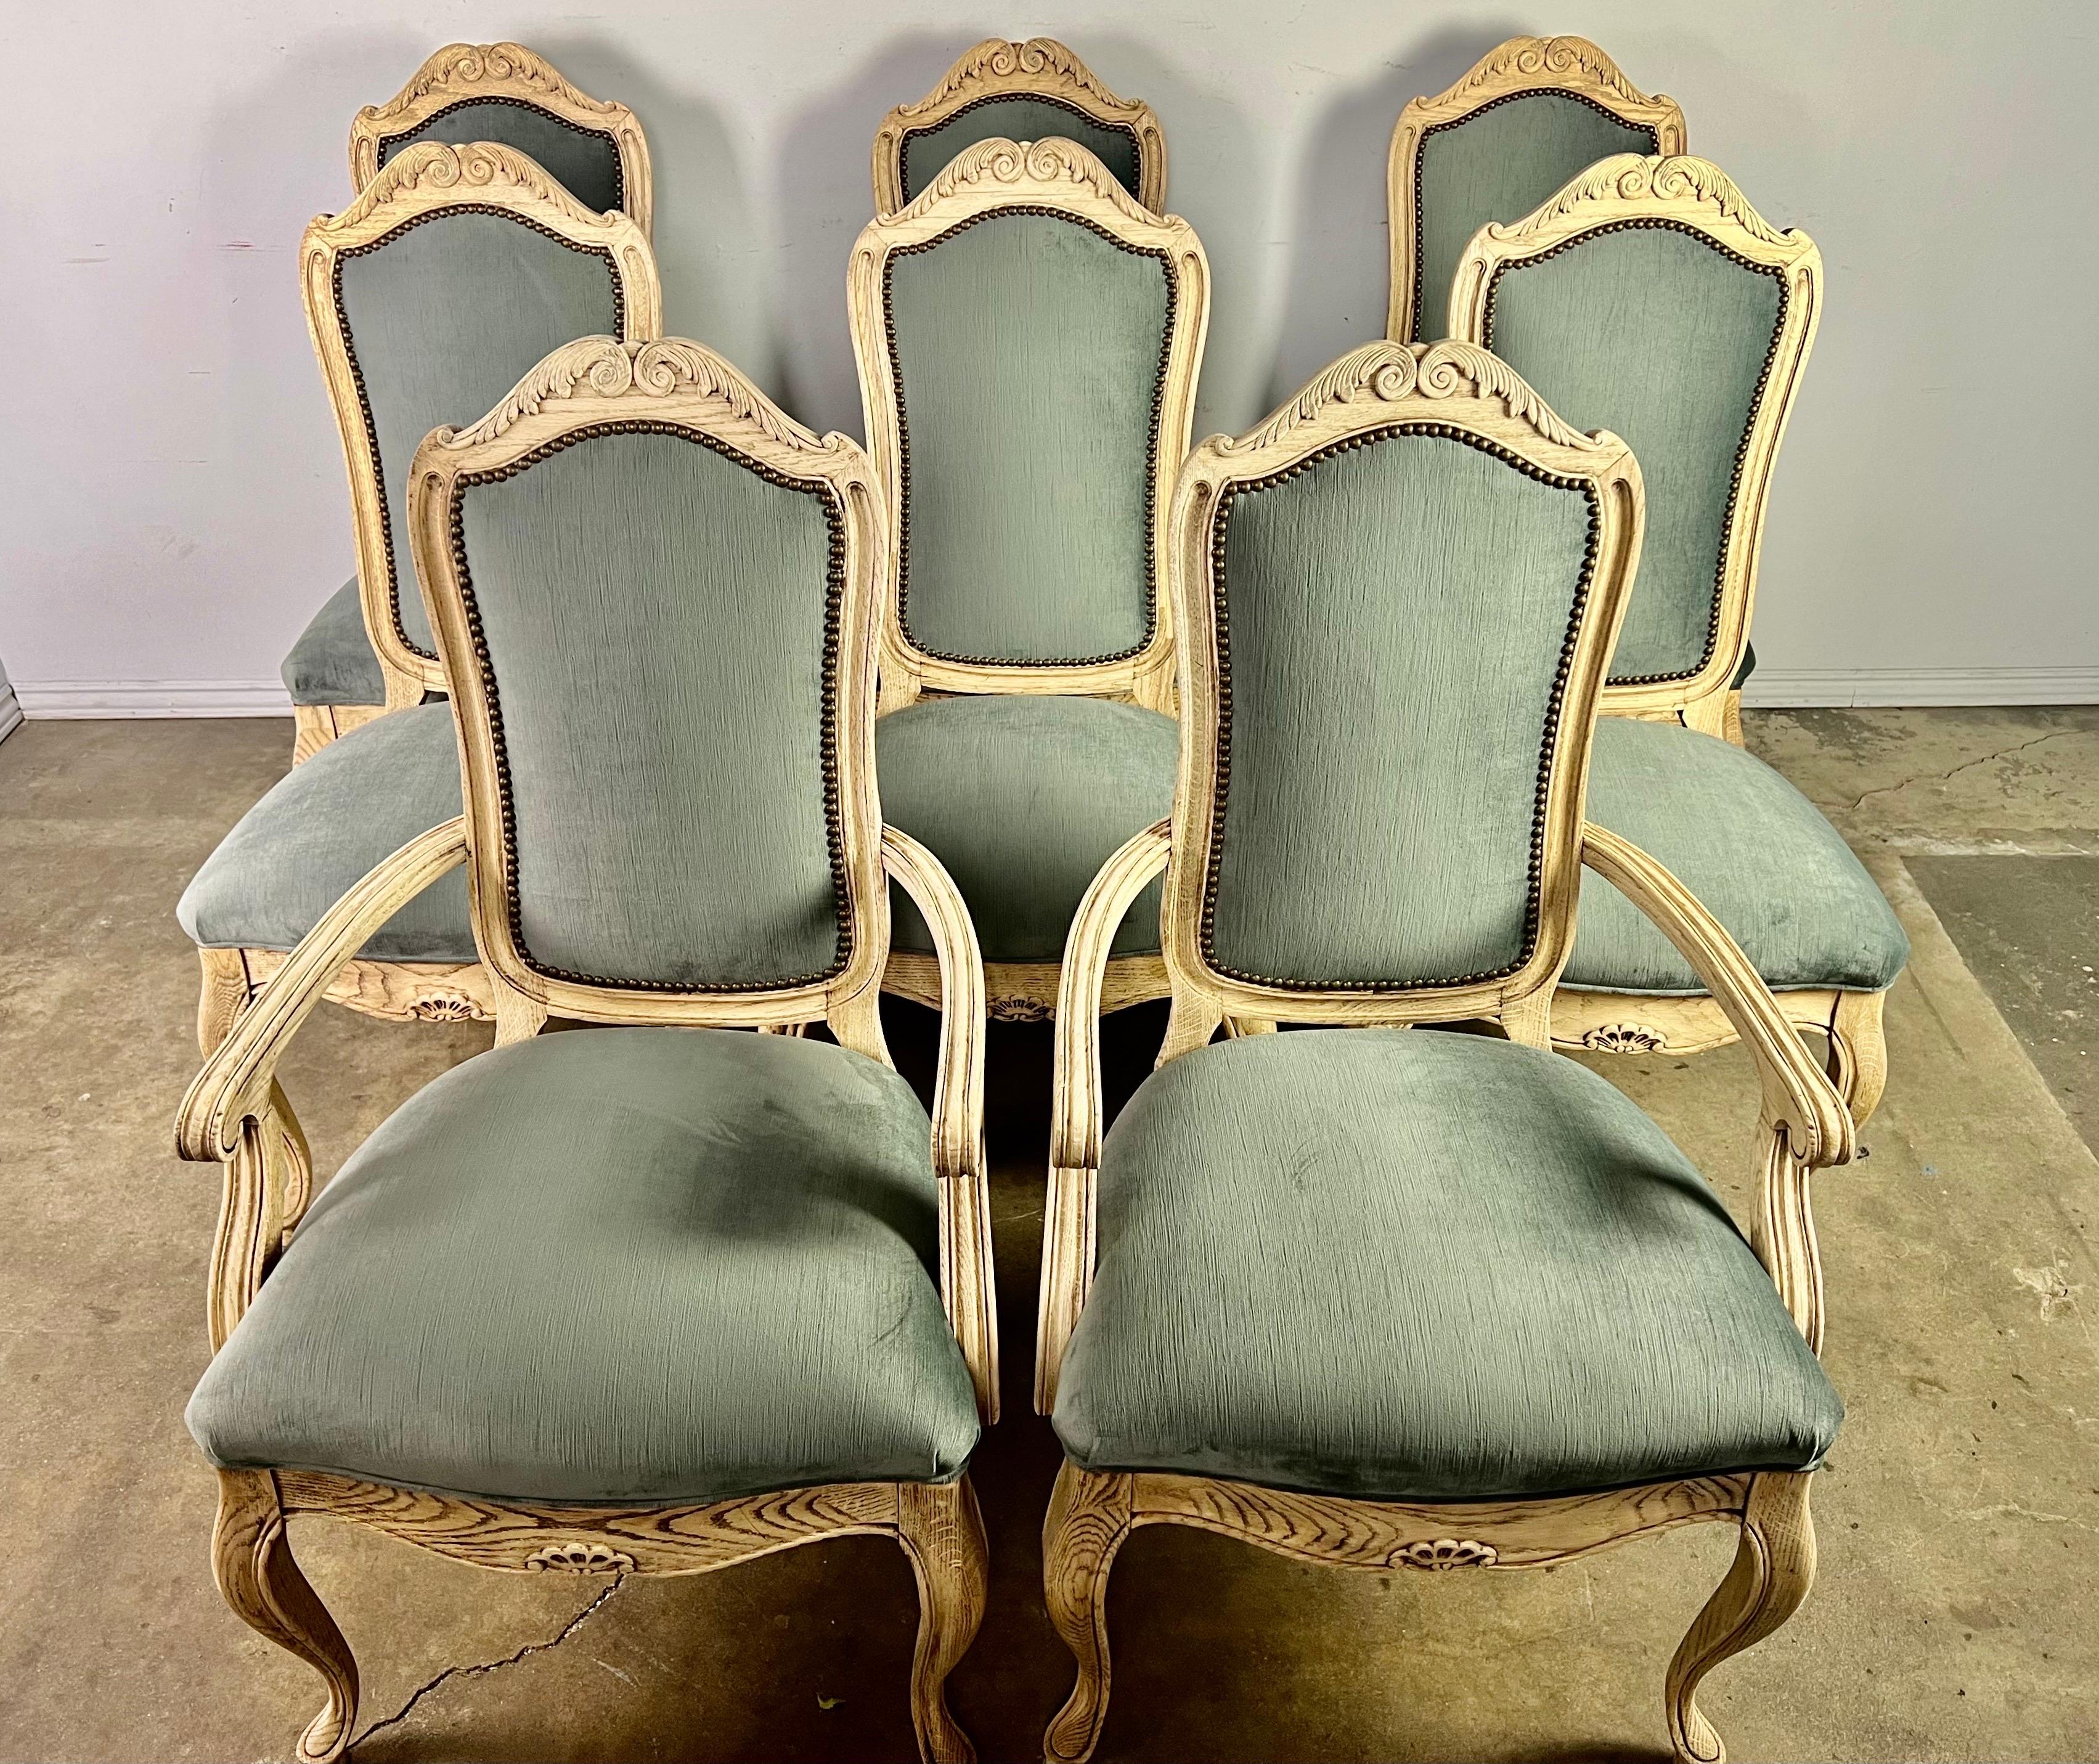 Set of eight painted French Louis XV style dining chairs newly upholstered in blue velvet and finished with a row of nailheads. The chairs stand on cabriole legs that end in rams head feet. There are an opposing pair of acanthus leaves depicted at